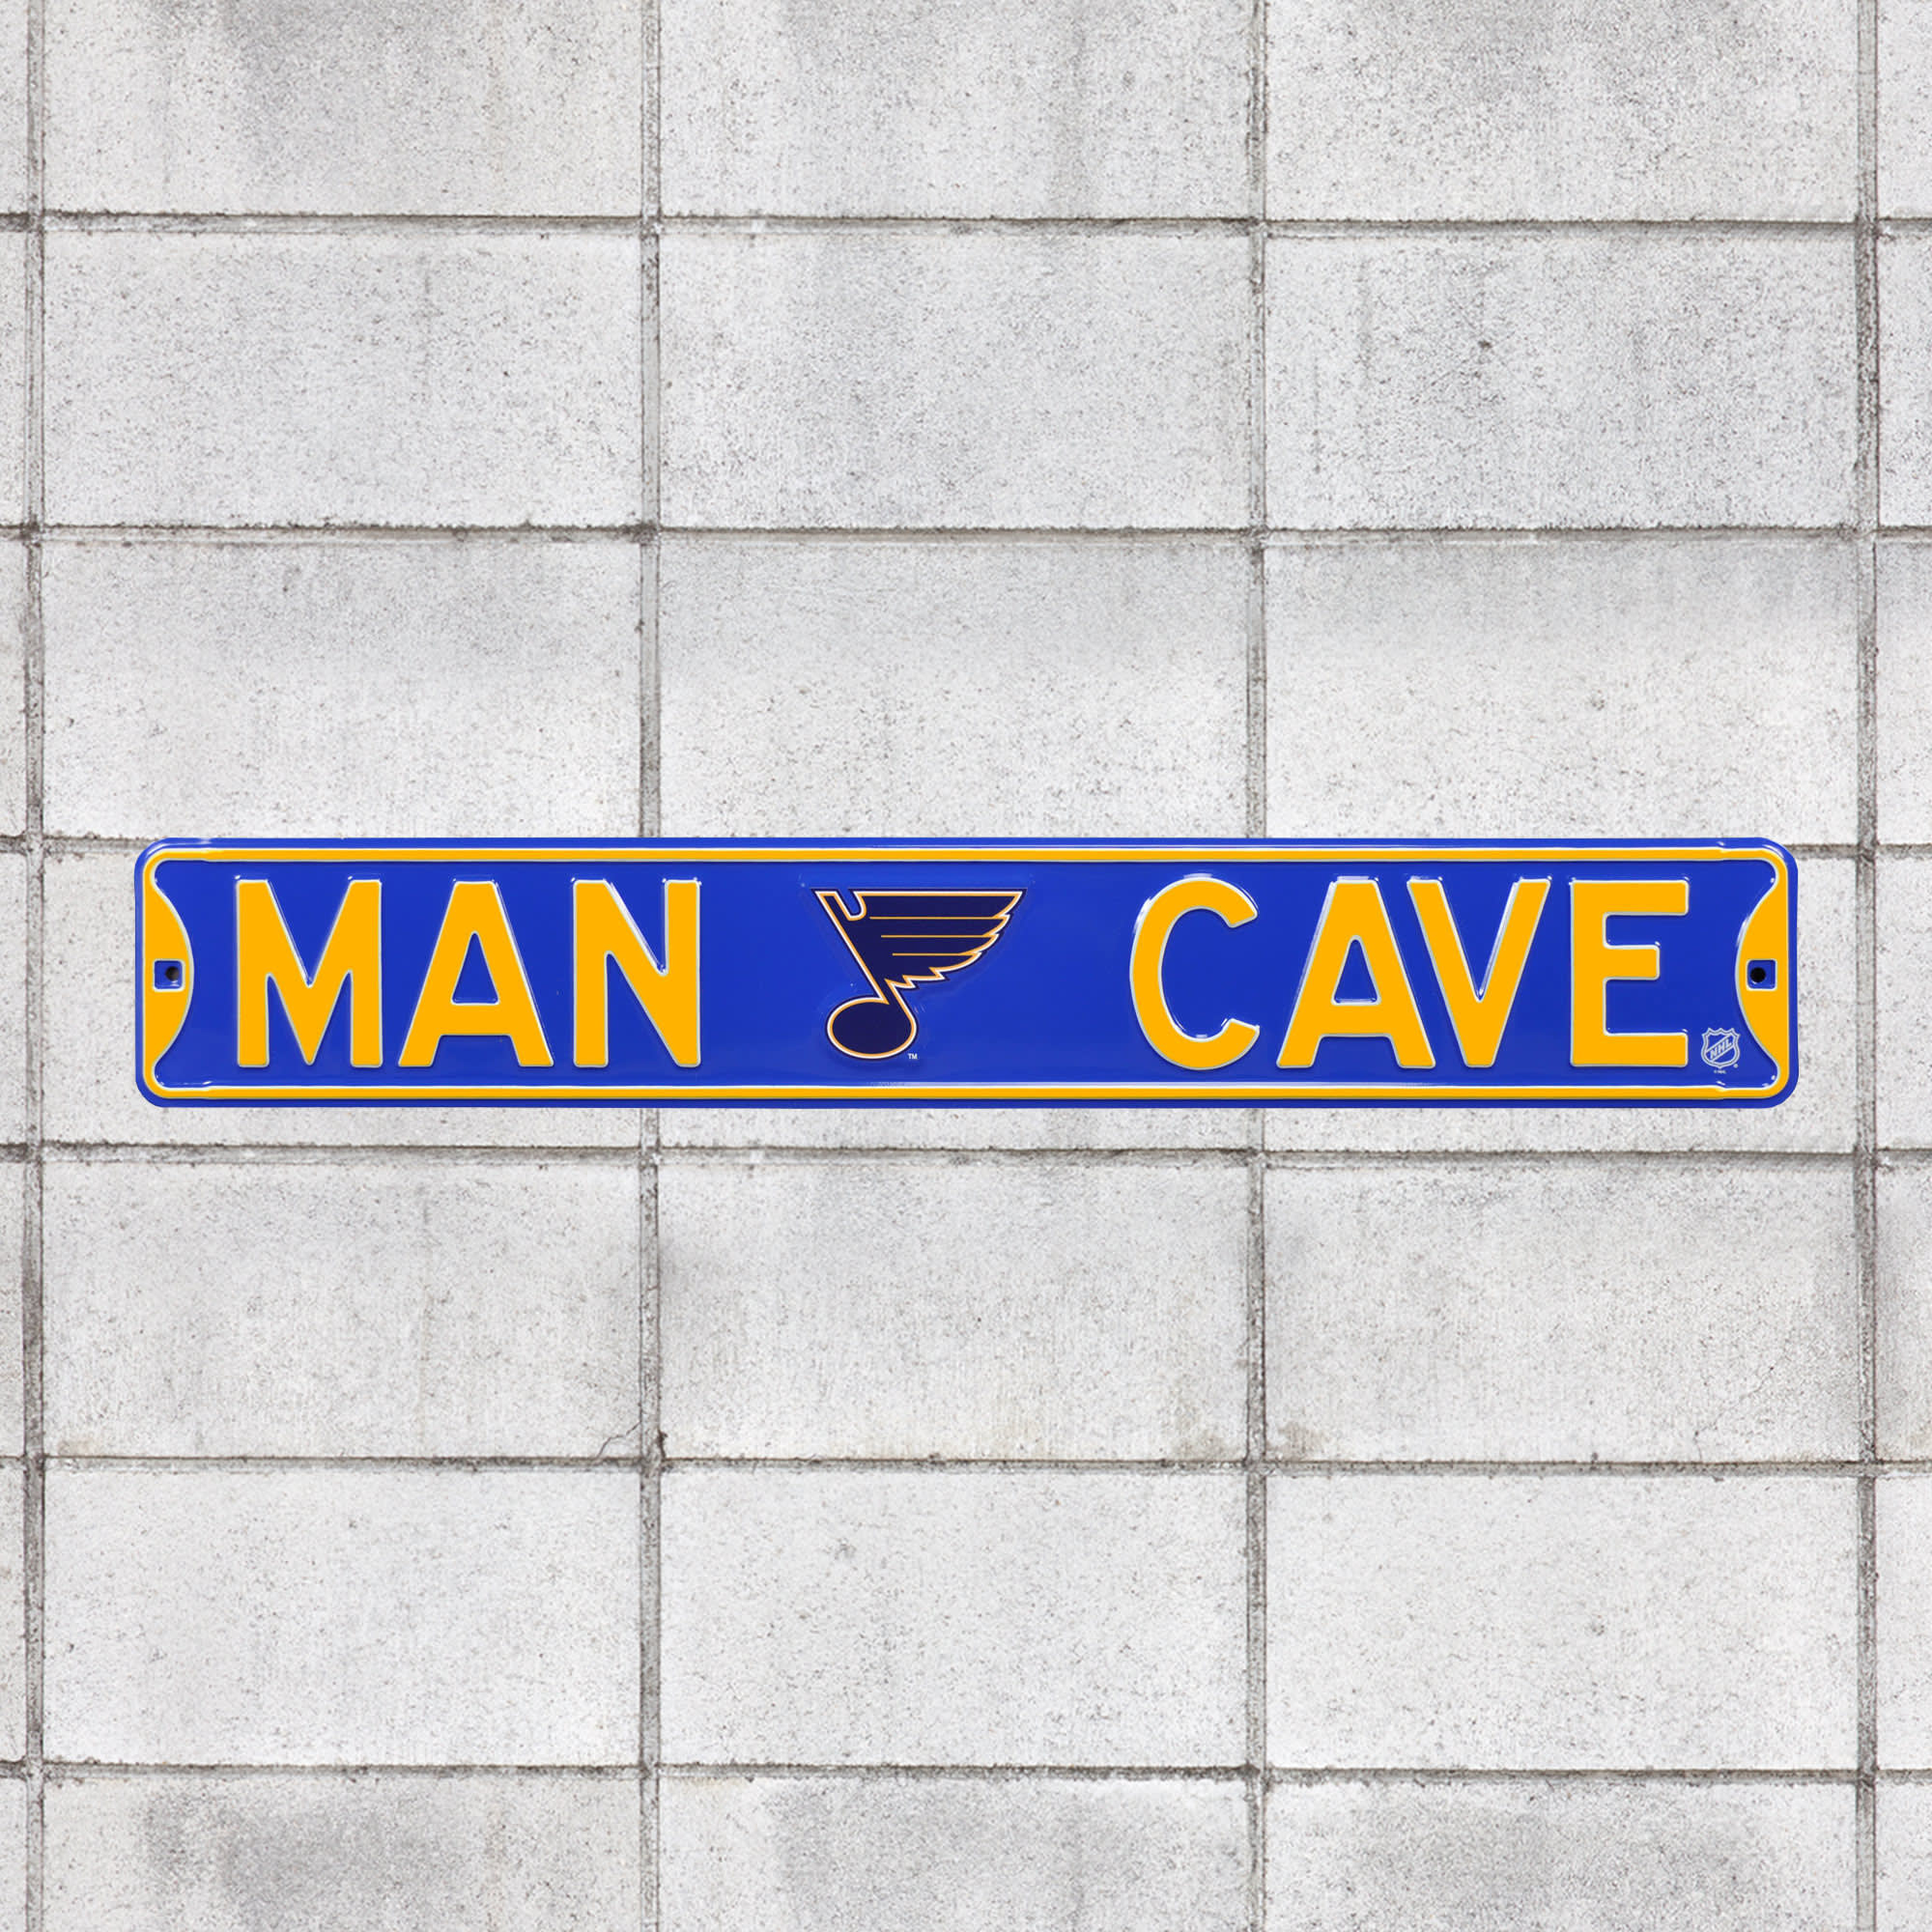 St. Louis Blues: Man Cave - Officially Licensed NHL Metal Street Sign 36.0"W x 6.0"H by Fathead | 100% Steel